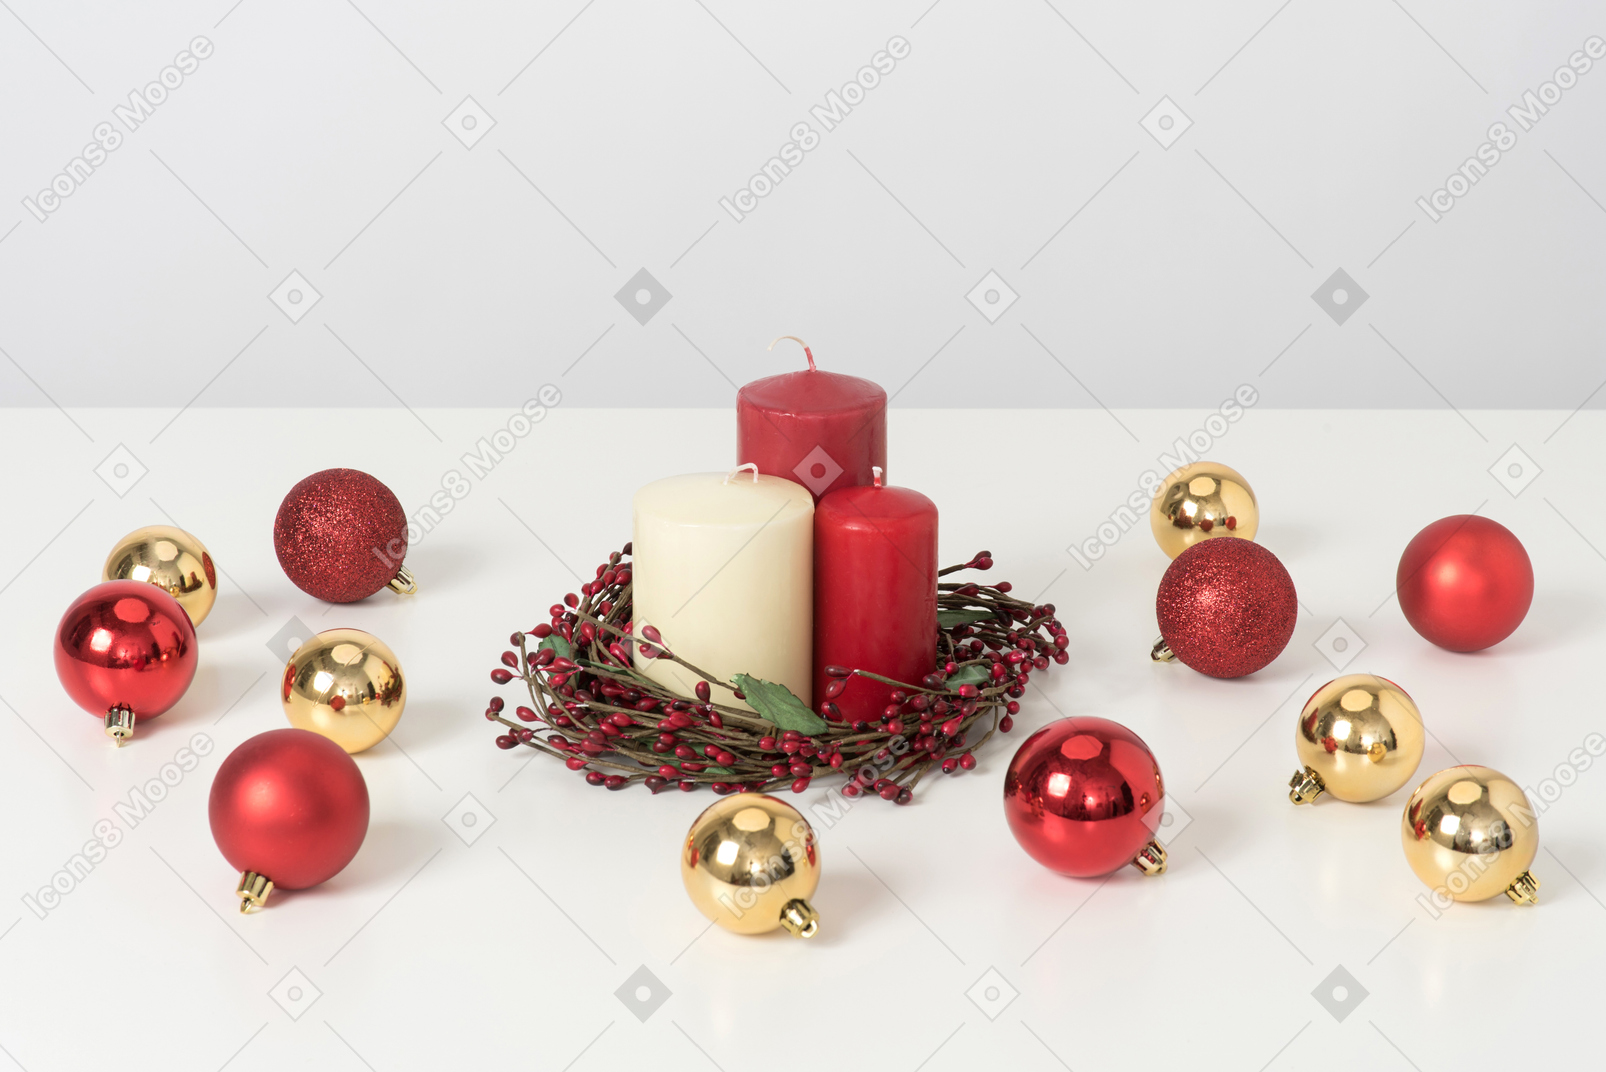 Preparing a table with christmas decorations